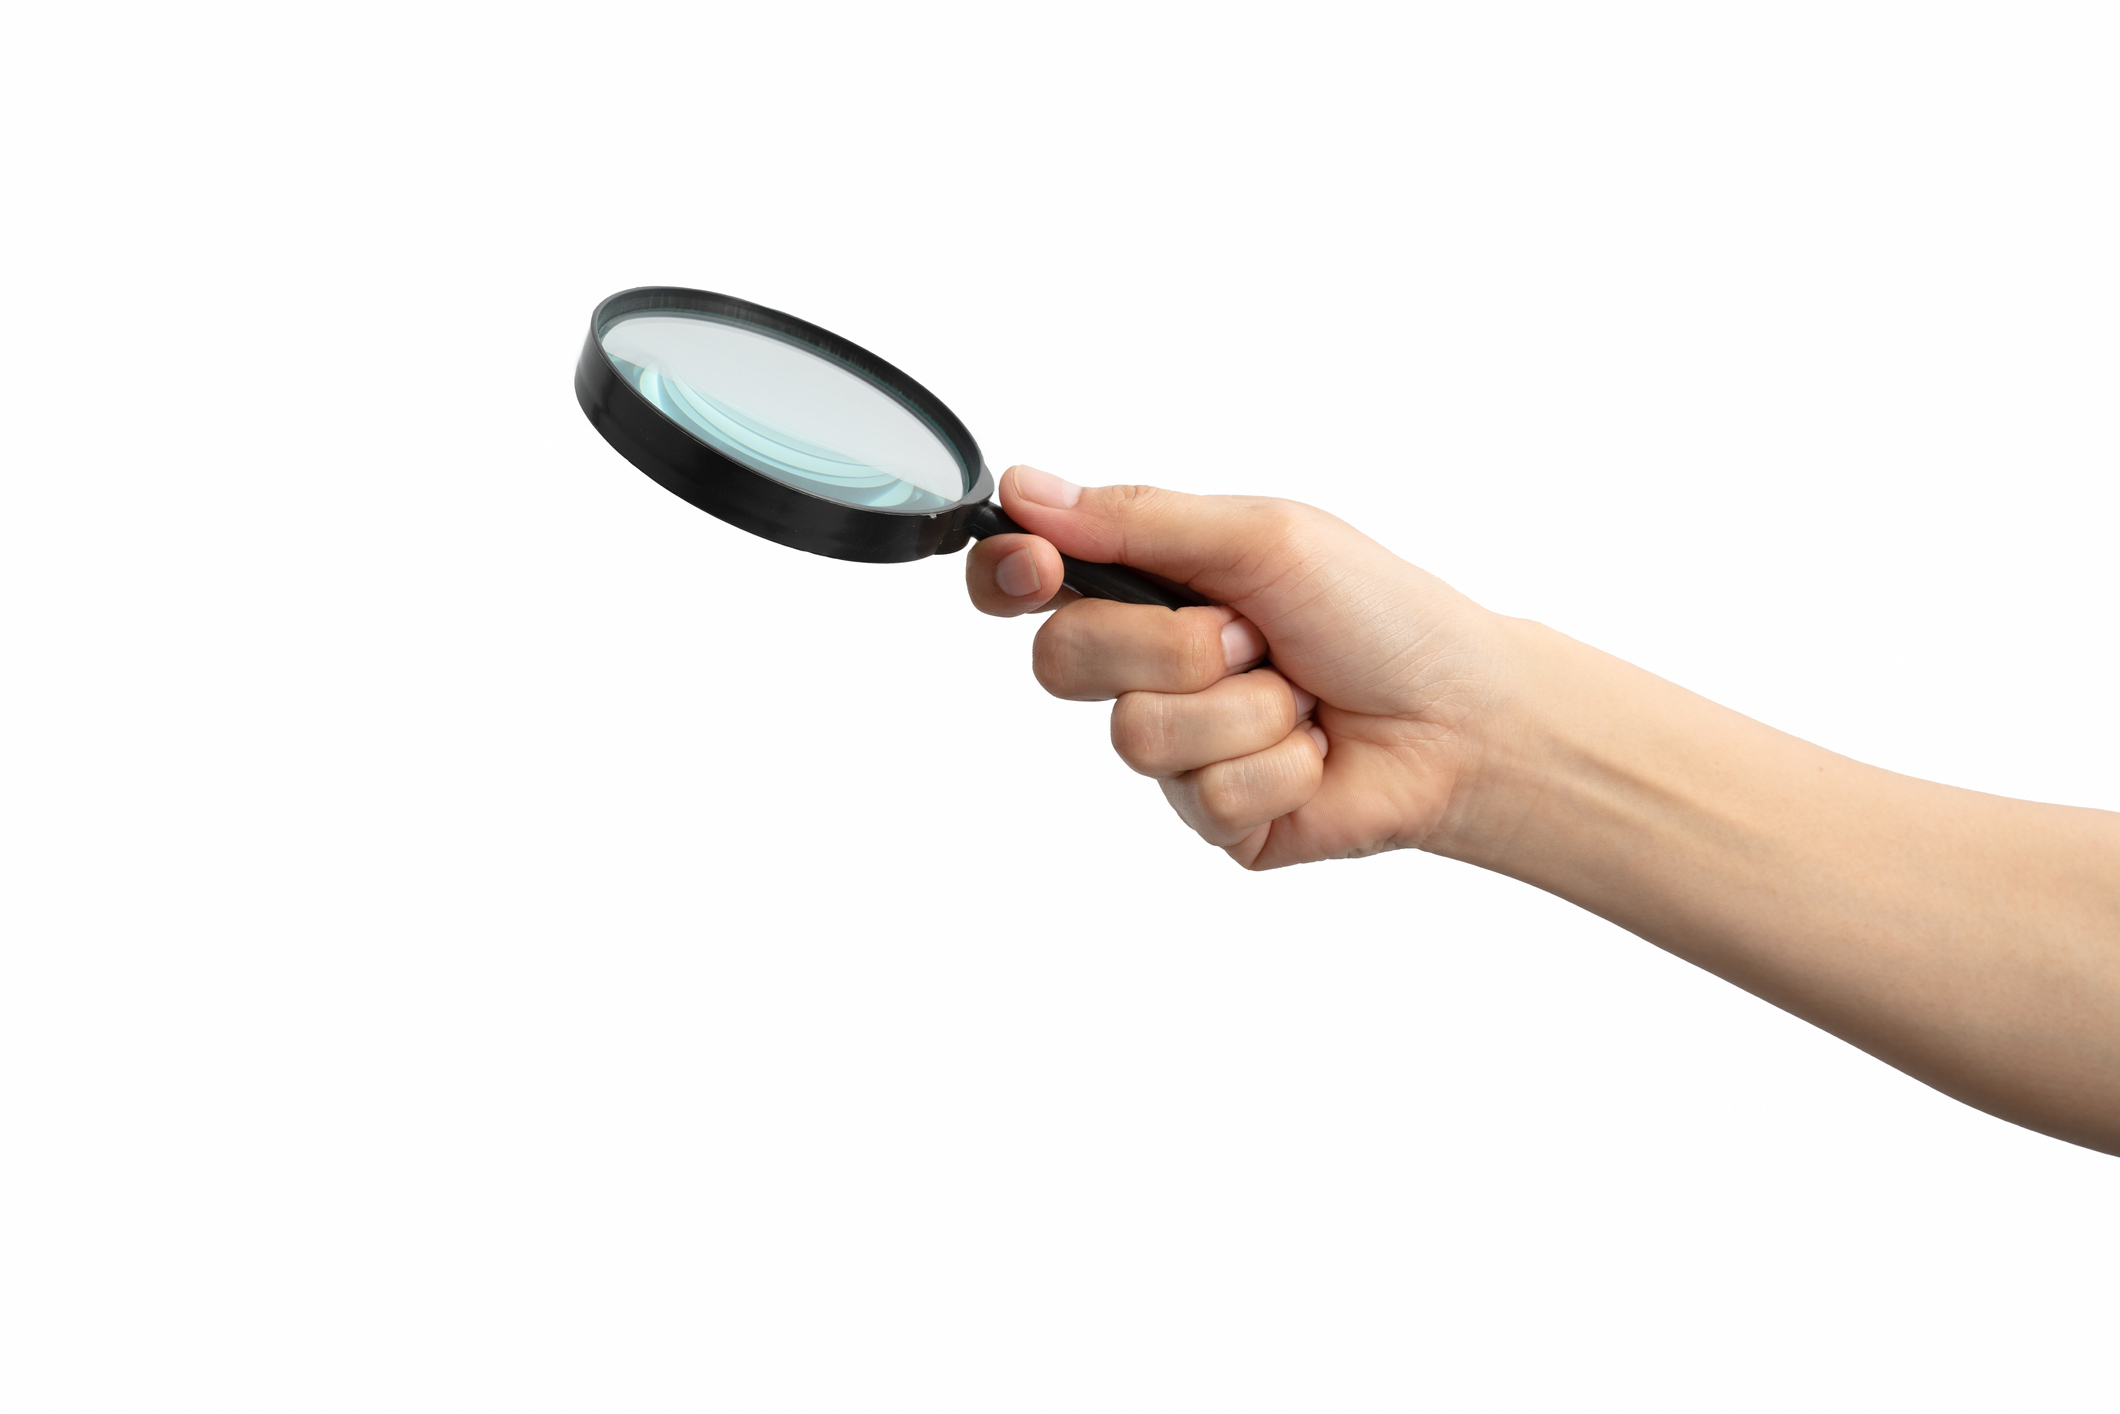 Hand holding a magnifying glass isolated on white background